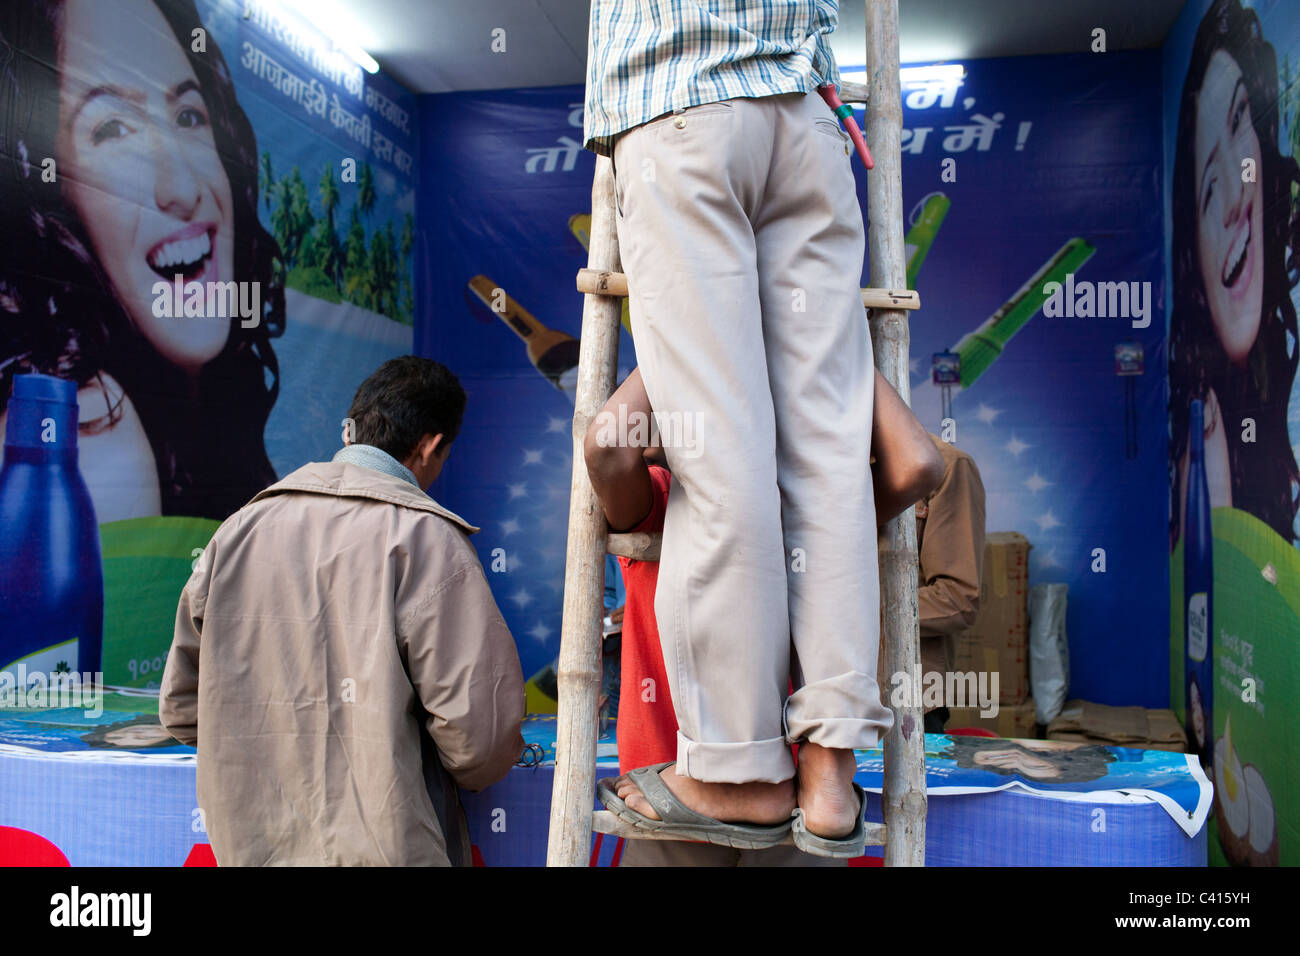 A humorous scene at one of the commercial stands at Sonepur Mela in Sonepur near Patna and Hajipur in Bihar state, India. Stock Photo